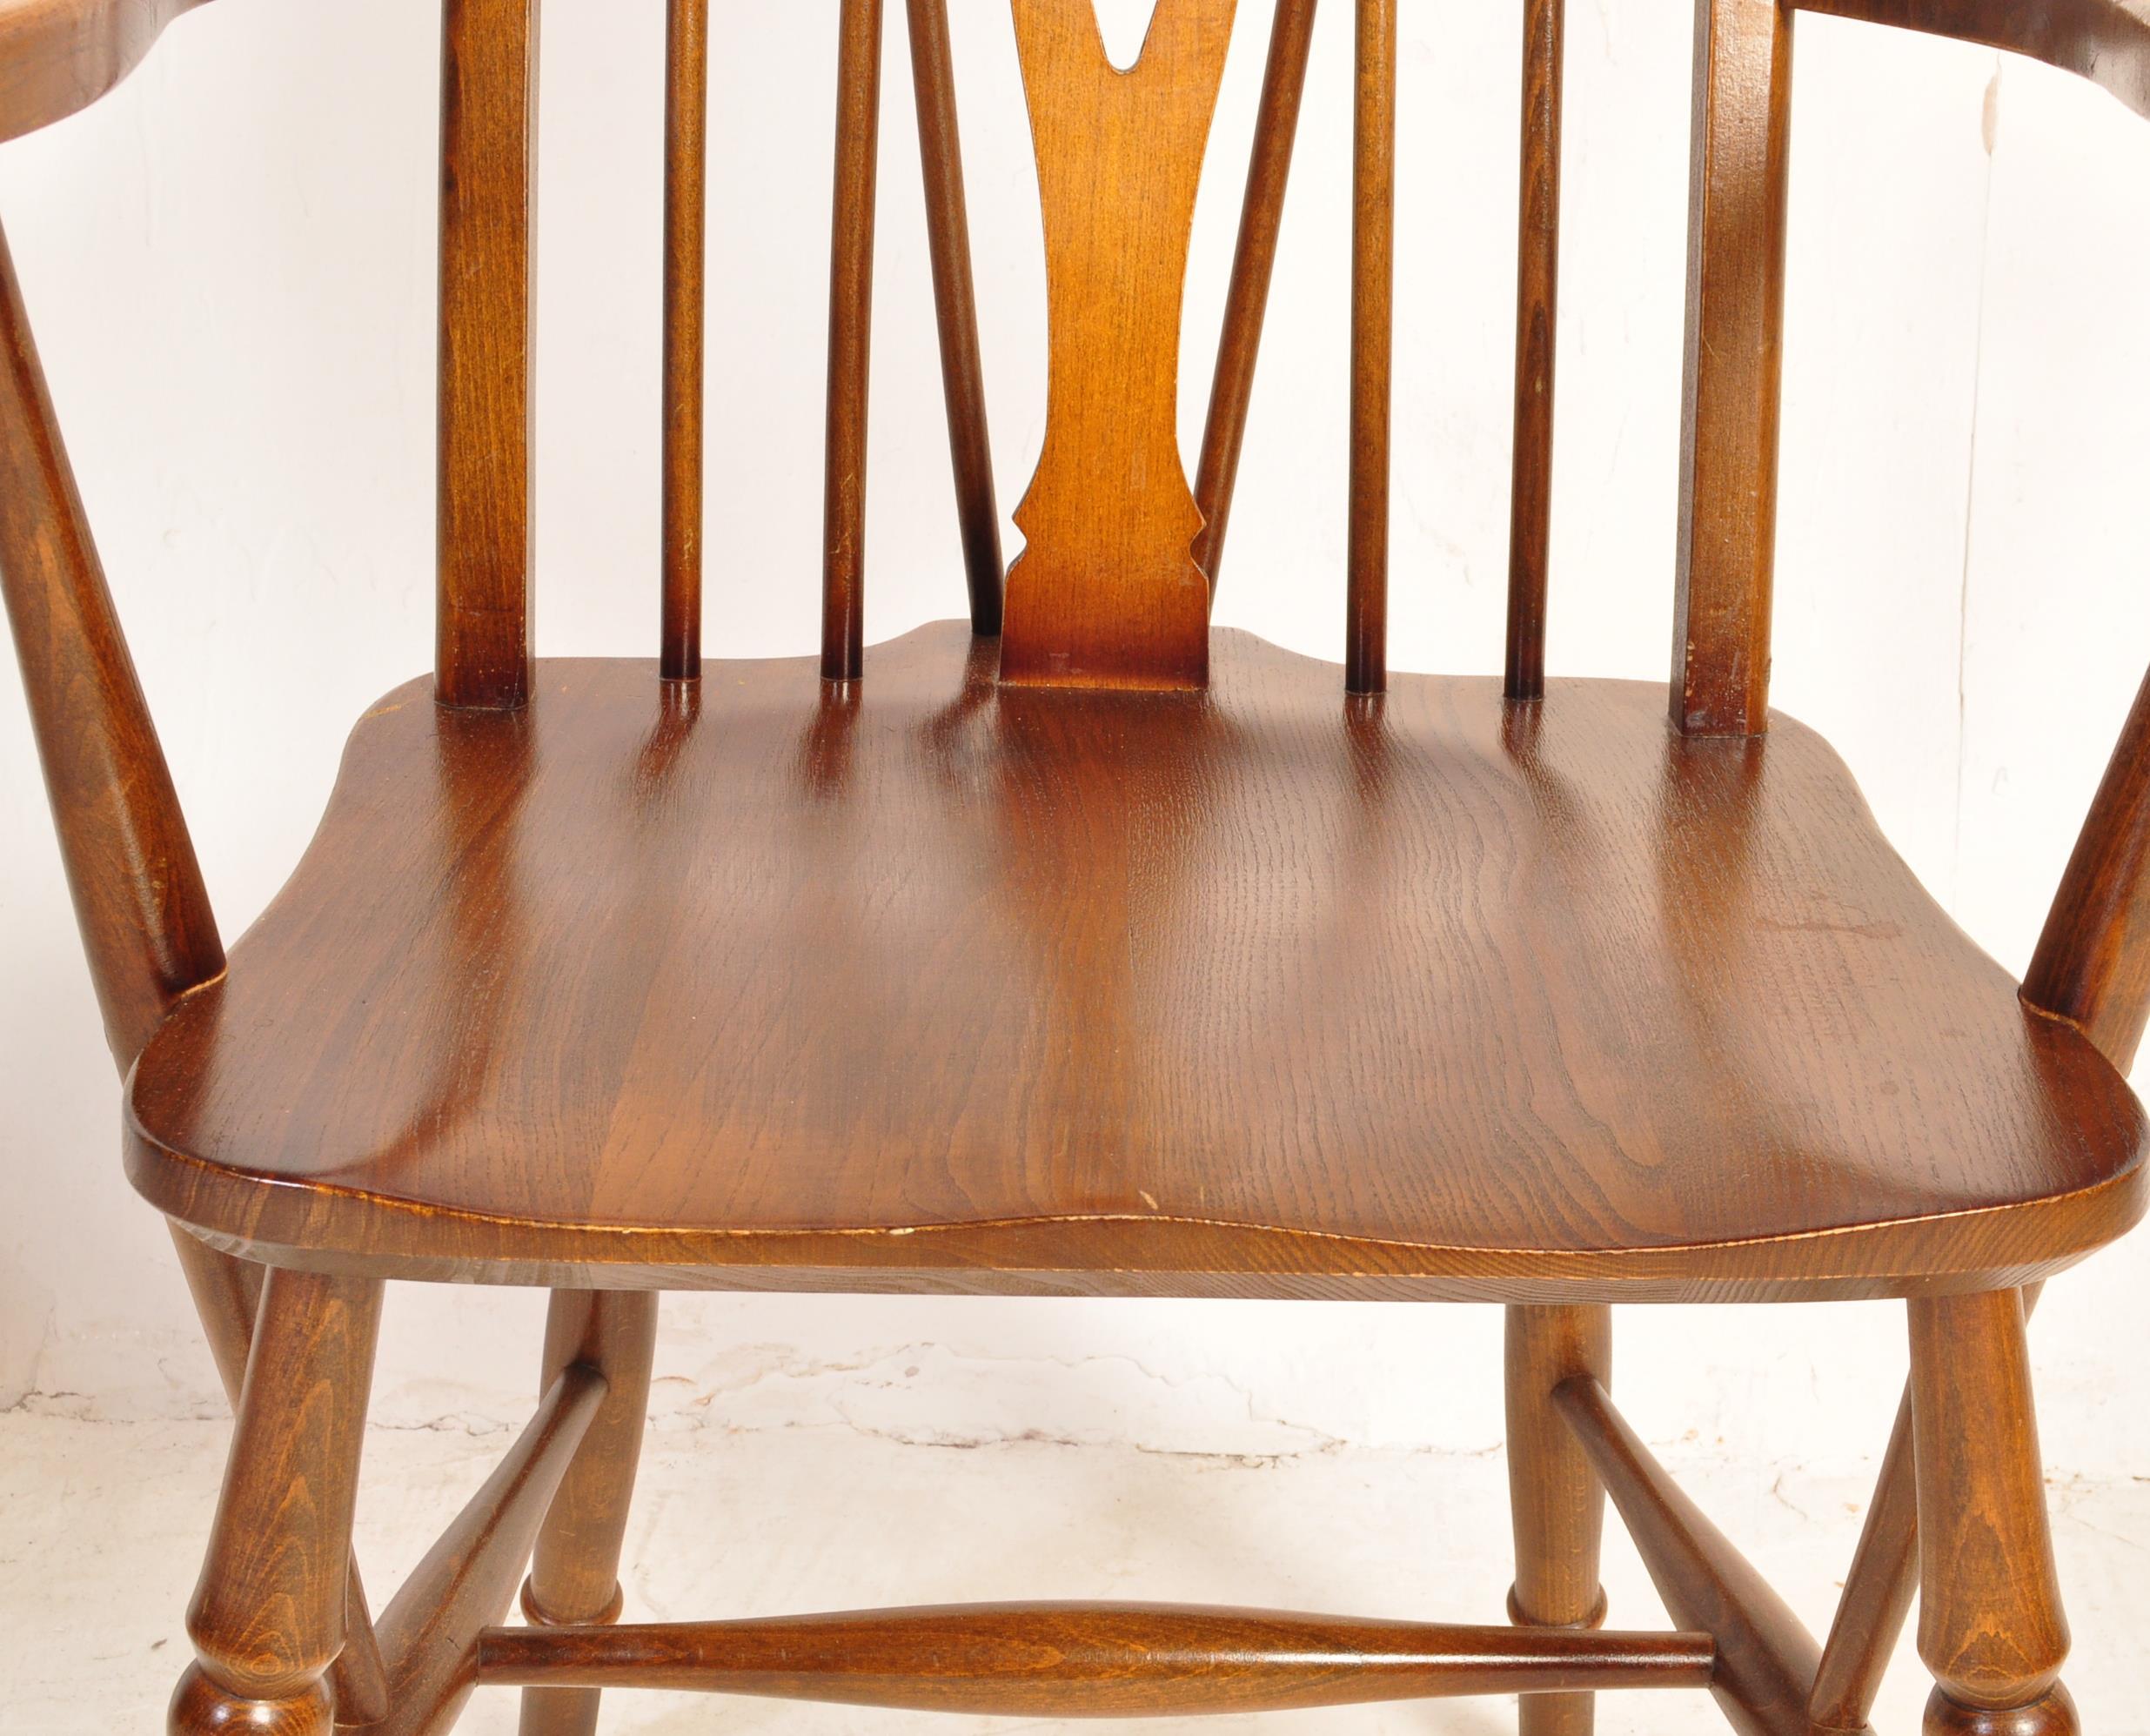 WOOD BROS OLD CHARM JACOBEAN REVIVAL DINING TABLE CHAIRS - Image 19 of 20